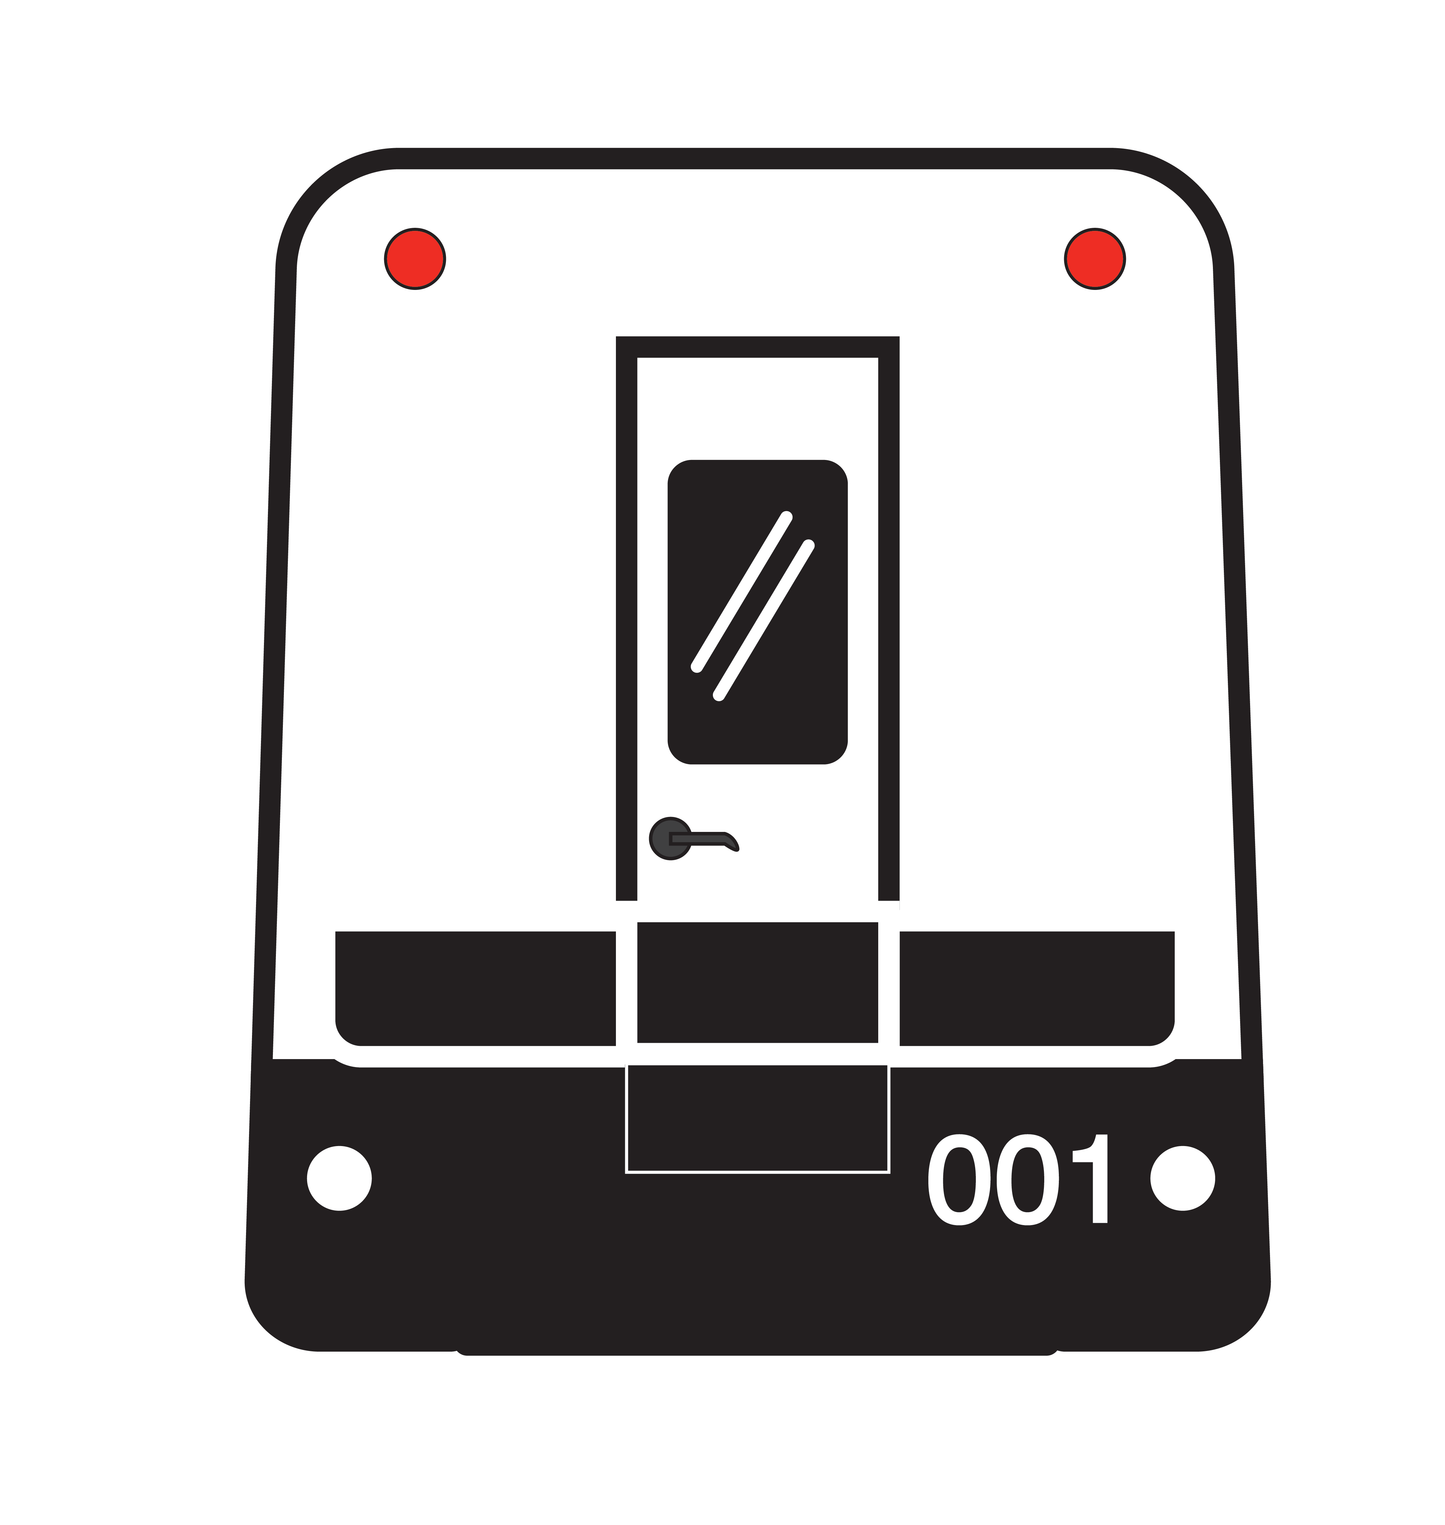 Simplified SkyTrain illustration for playing card suit.